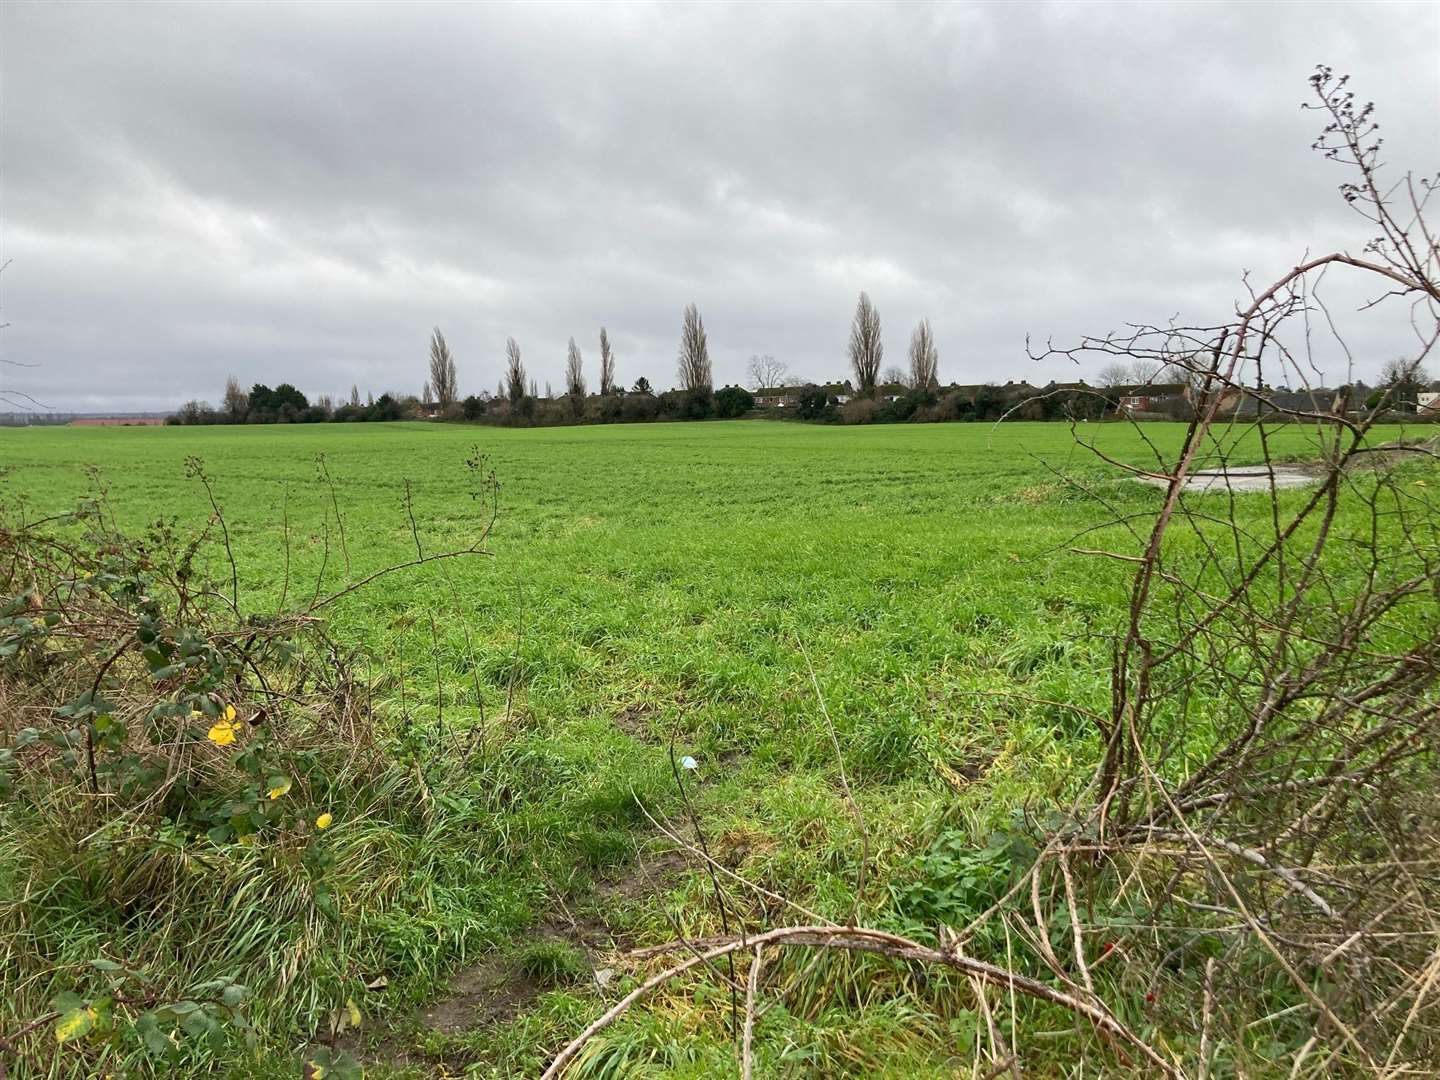 The farmland off Abbeyfields in Faversham, which could become a housing estate